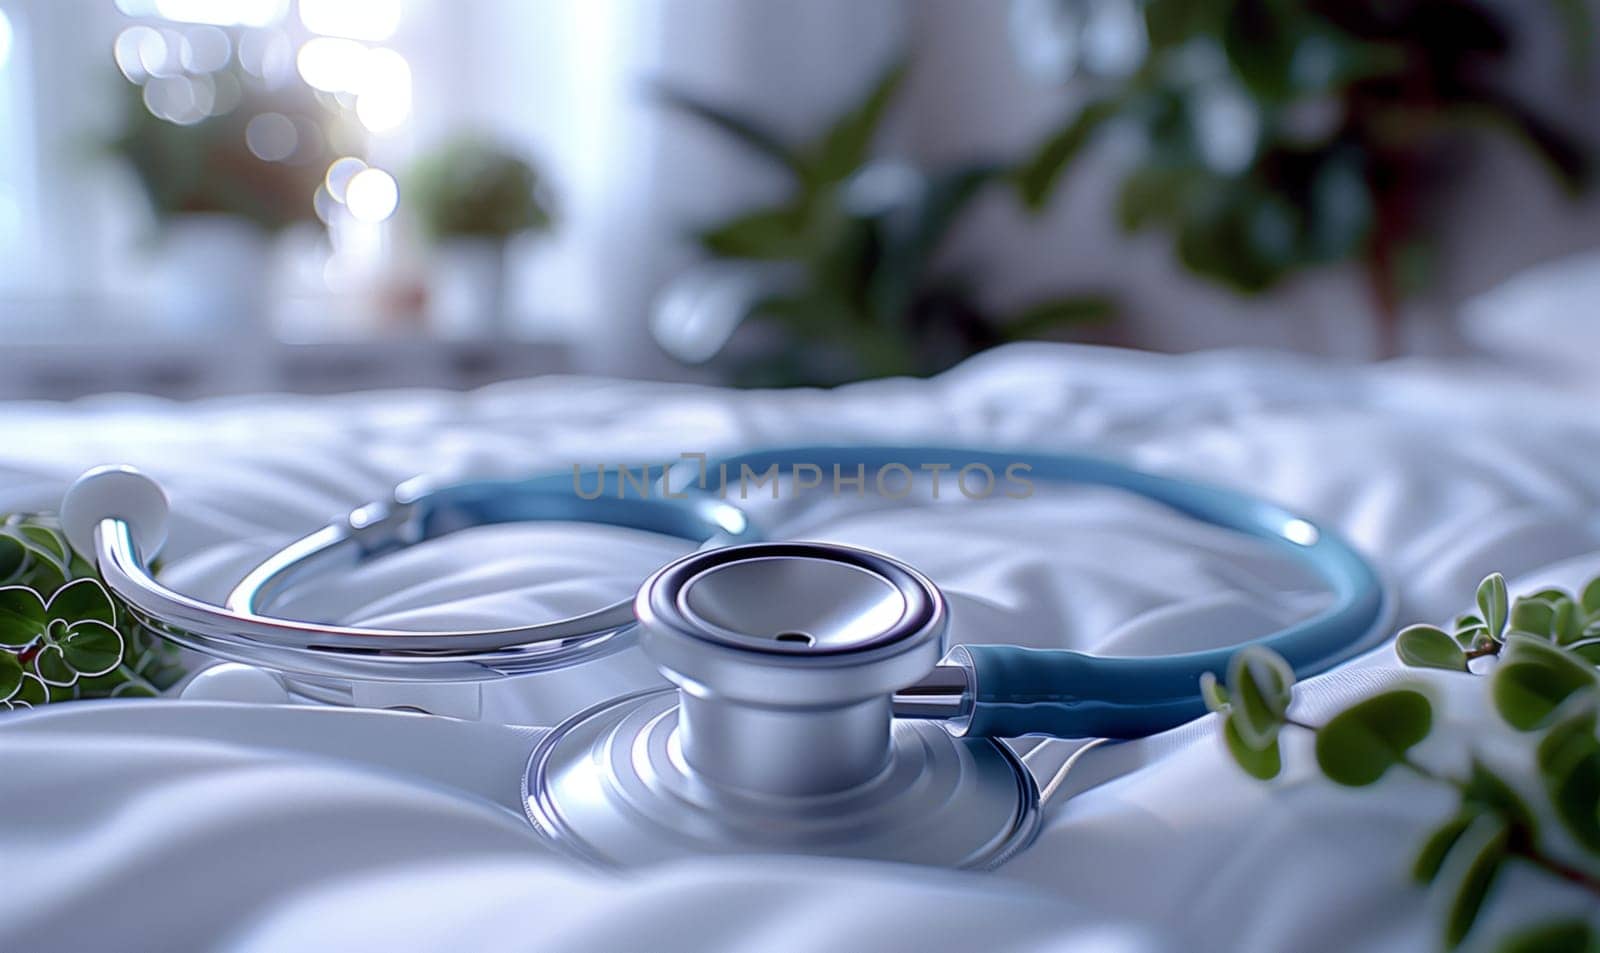 A stethoscope rests on a bed next to a shimmering glass of water by richwolf